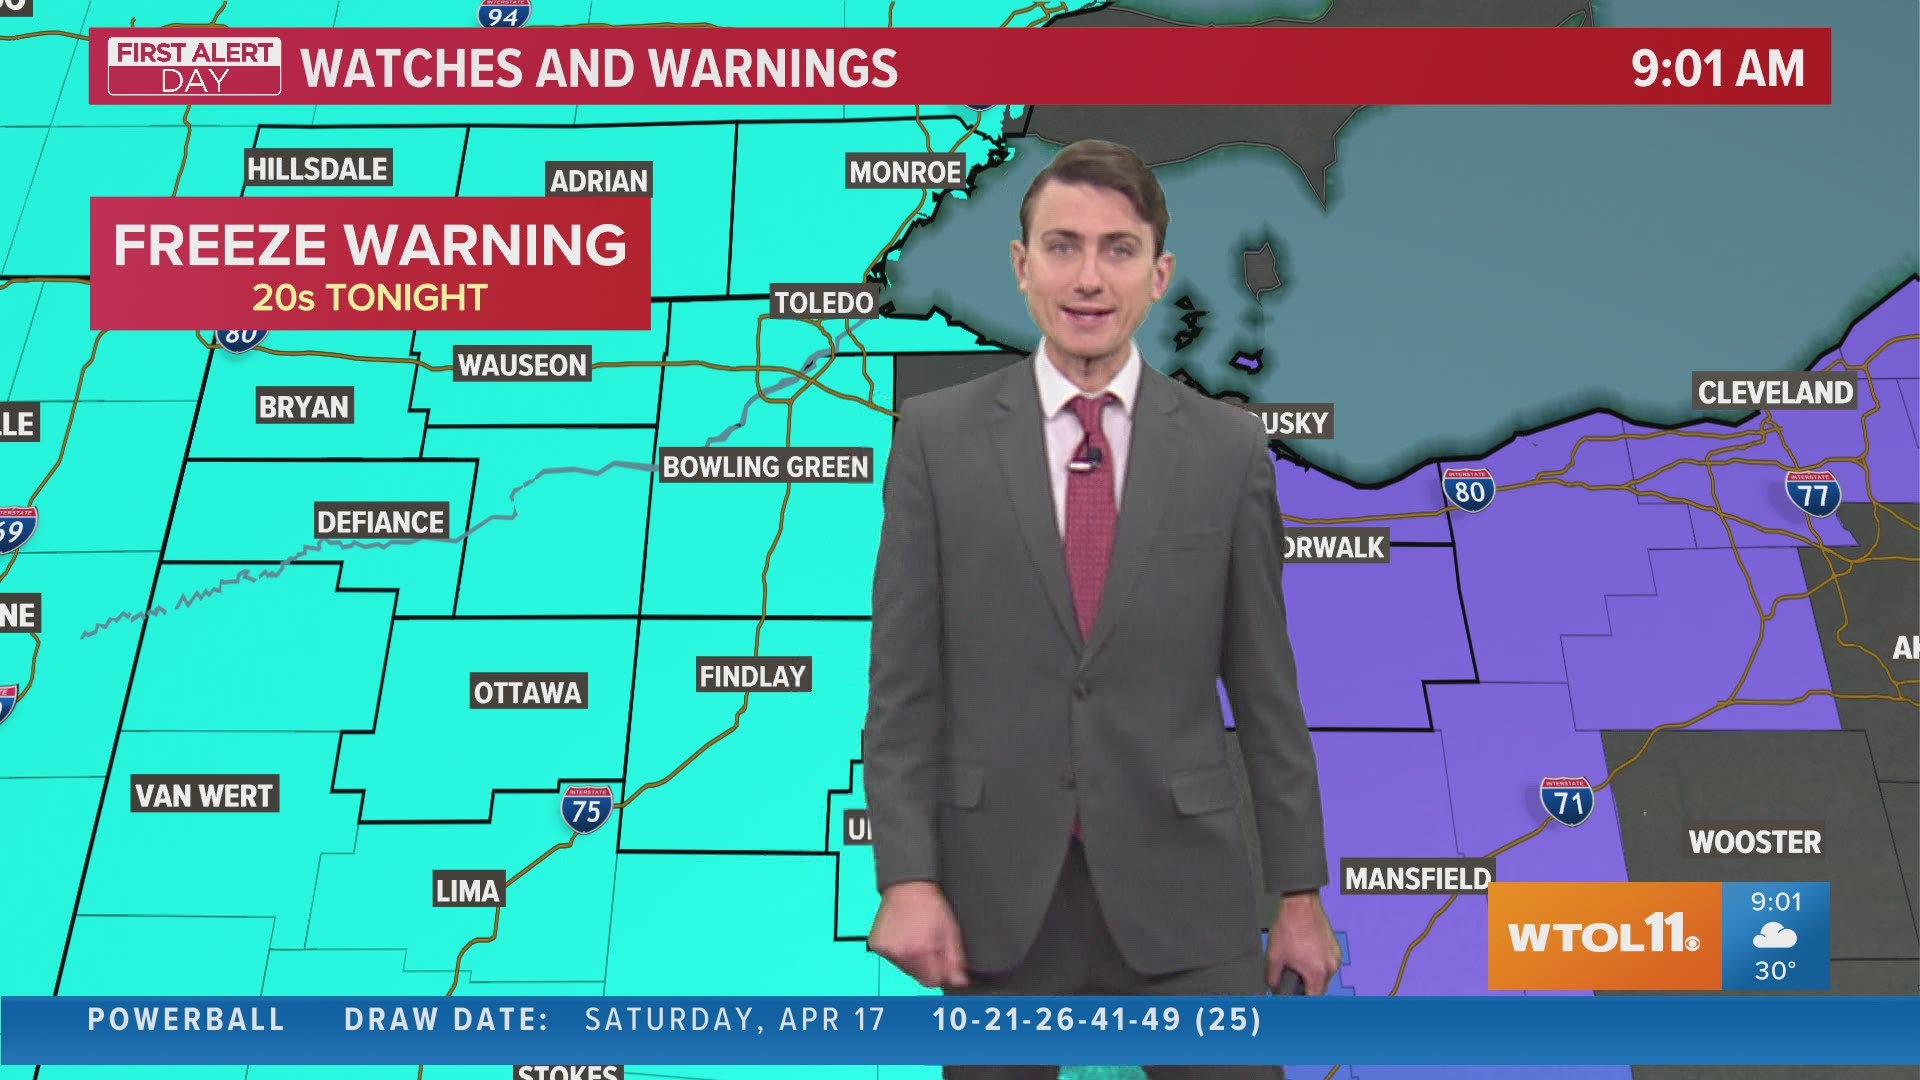 A FIRST ALERT DAY continues on until Thursday for wintry weather and bitter cold.